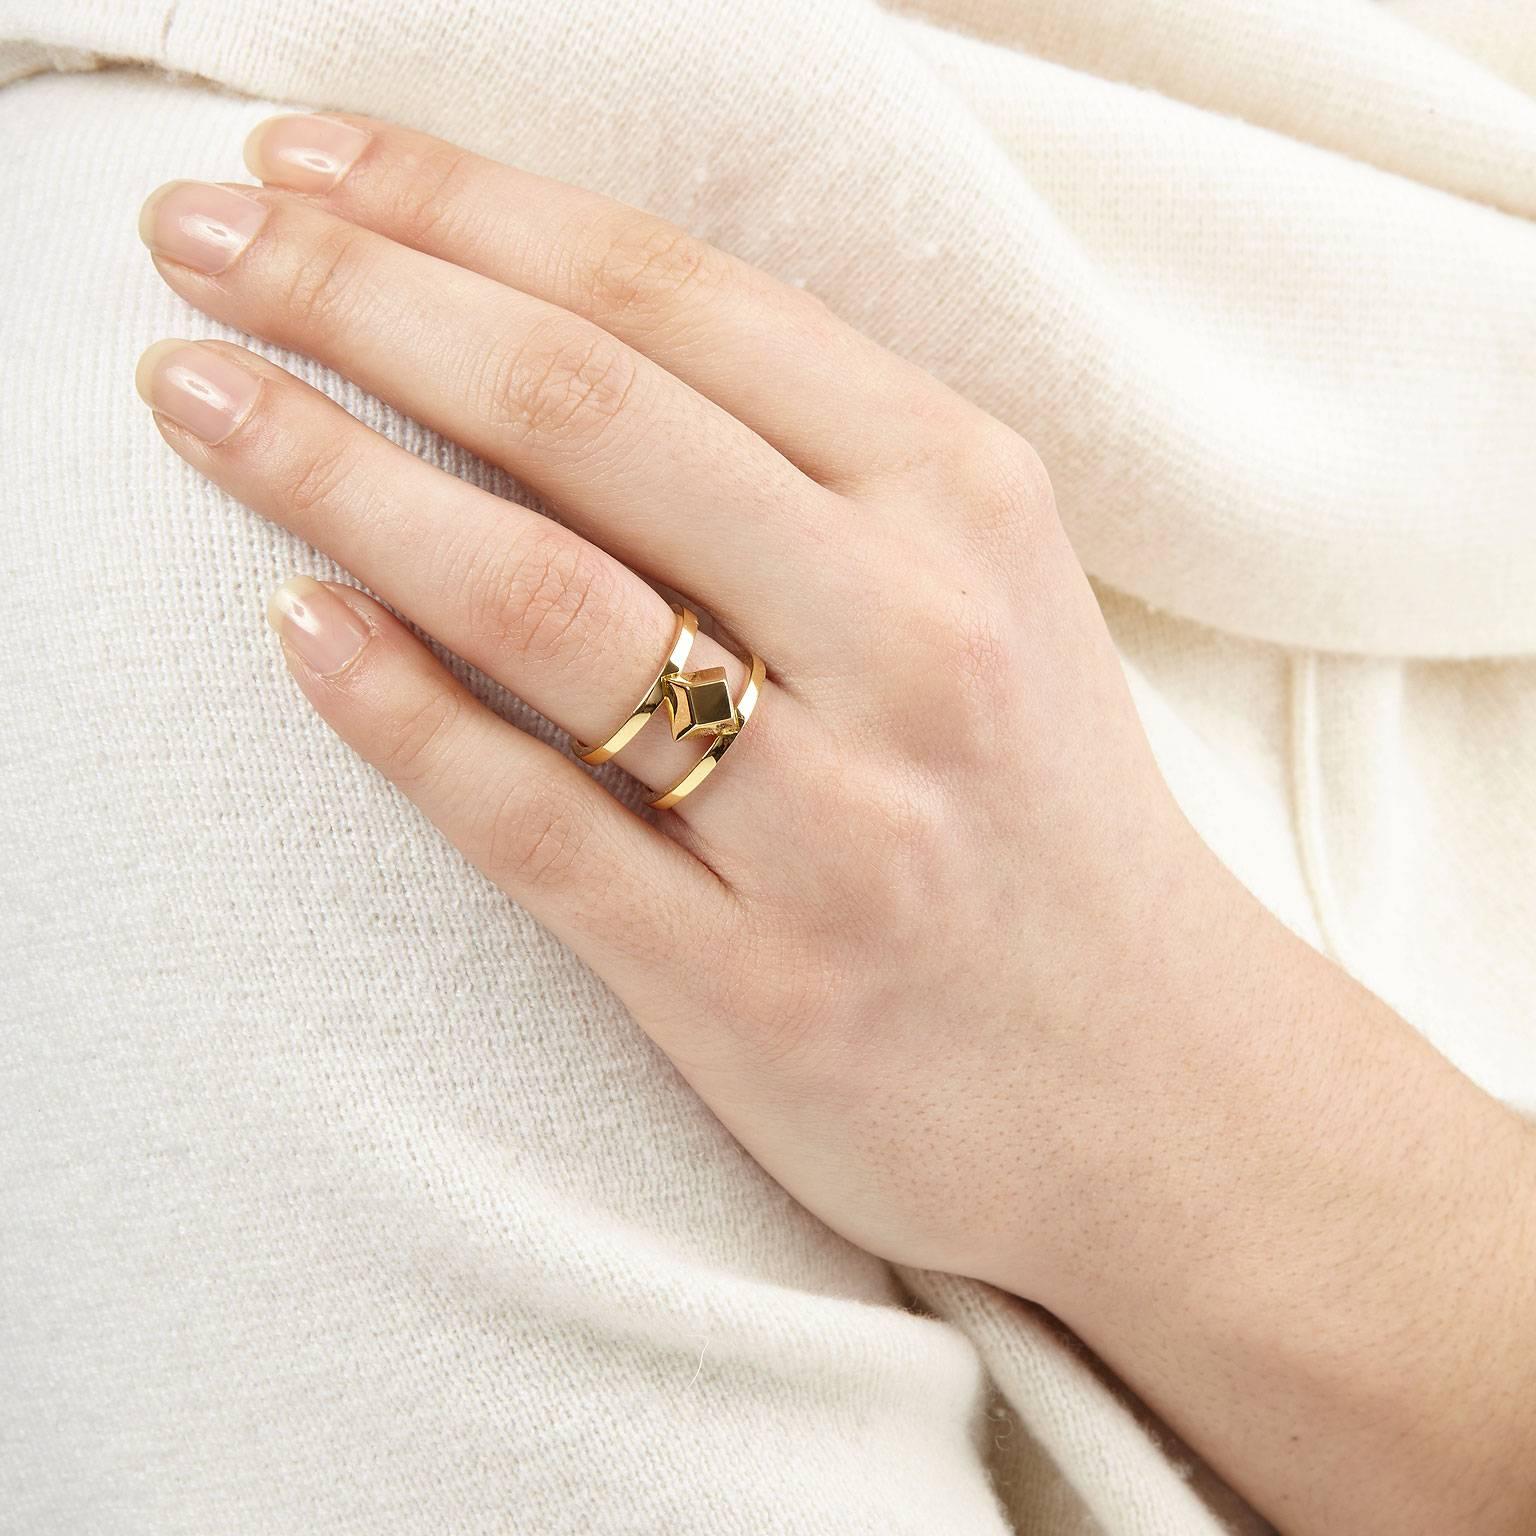 A modernist take on the cocktail ring. The simple yet bold design comprises a large pyramid set into two slender bands. Perfect for those who favour an architectural aesthetic to their jewellery.
Wear it to bring a contemporary elegance to everyday